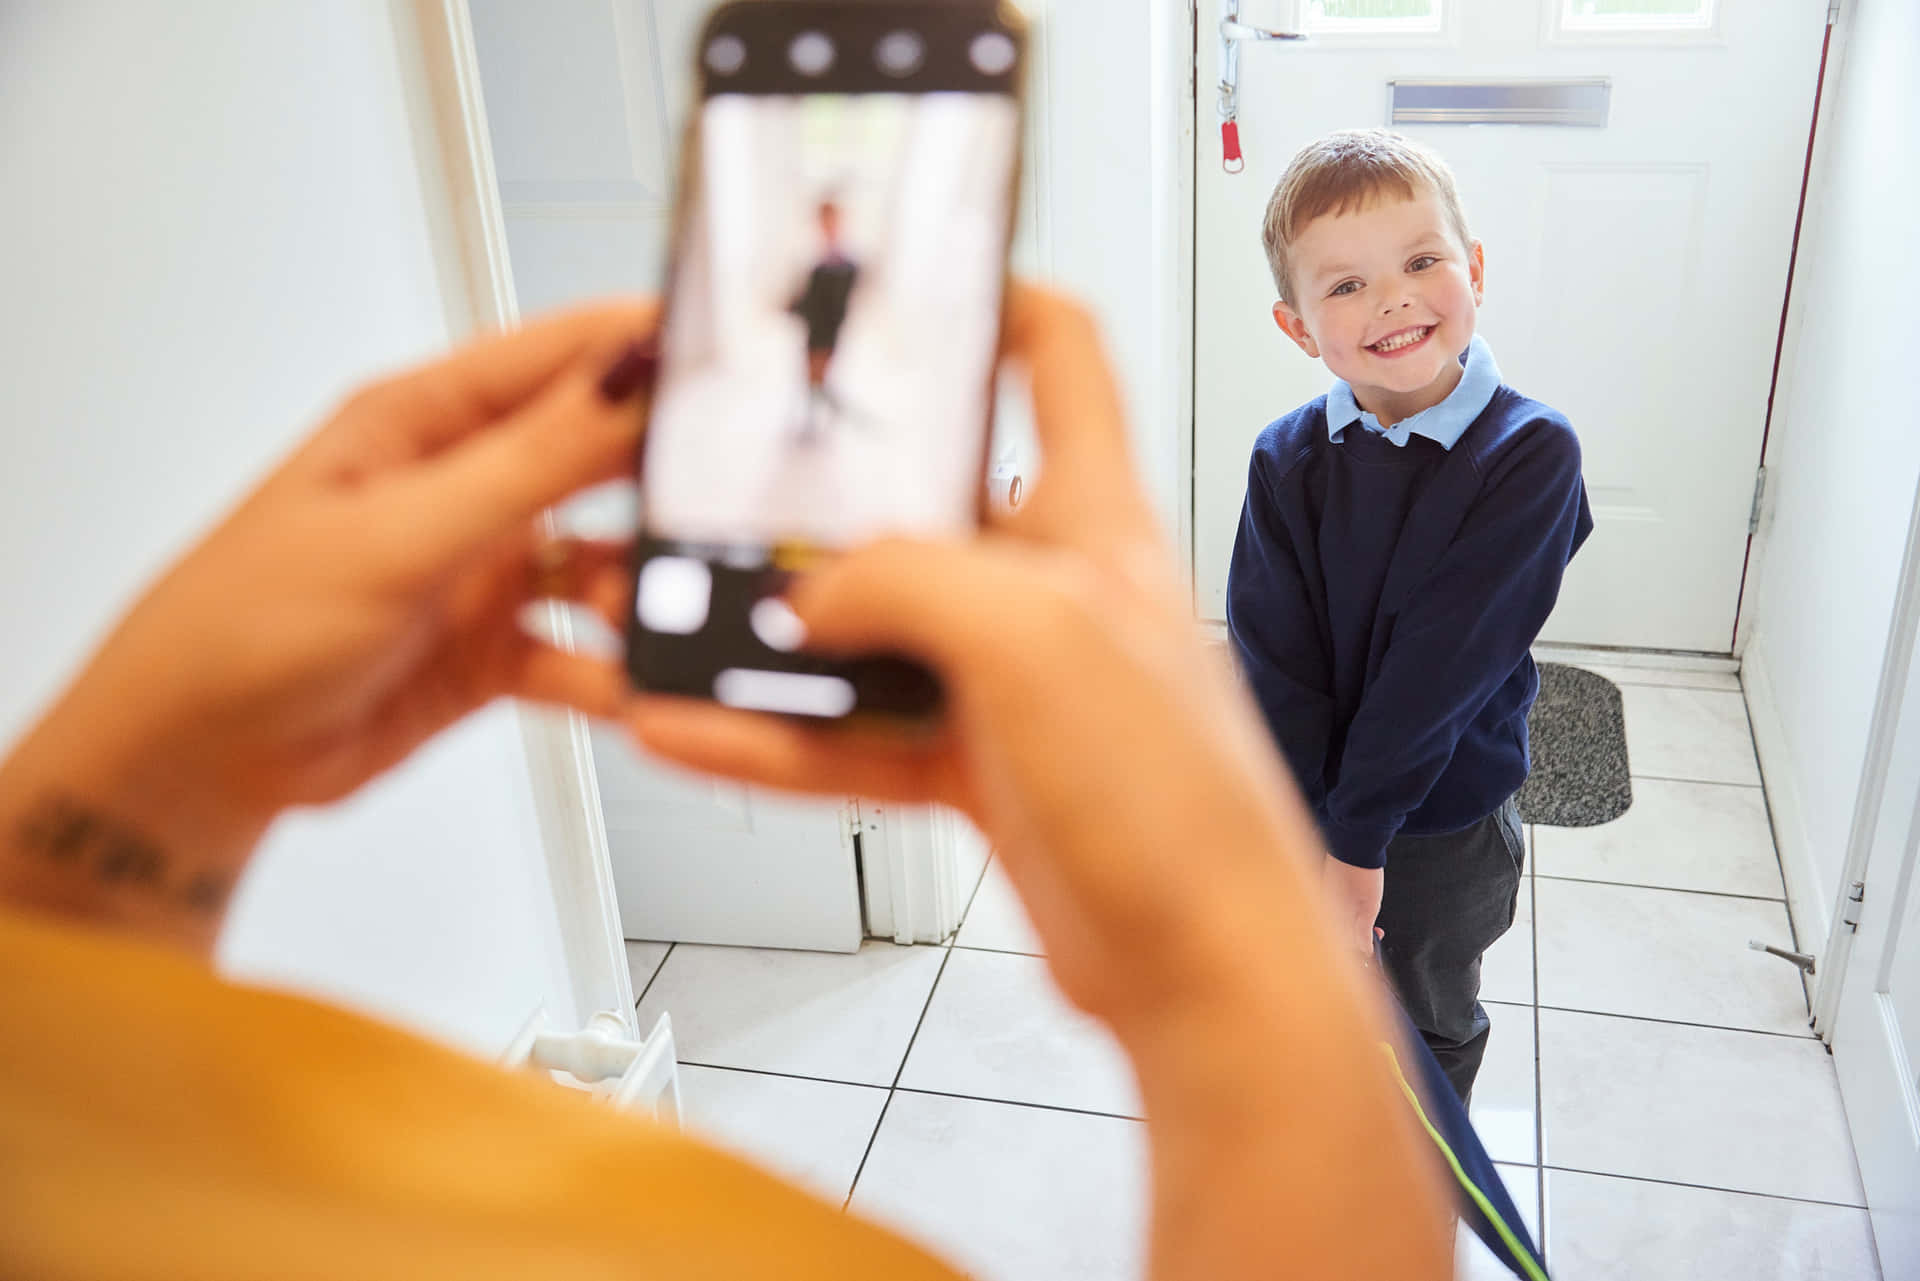 A Woman Taking A Picture Of A Boy In A Doorway